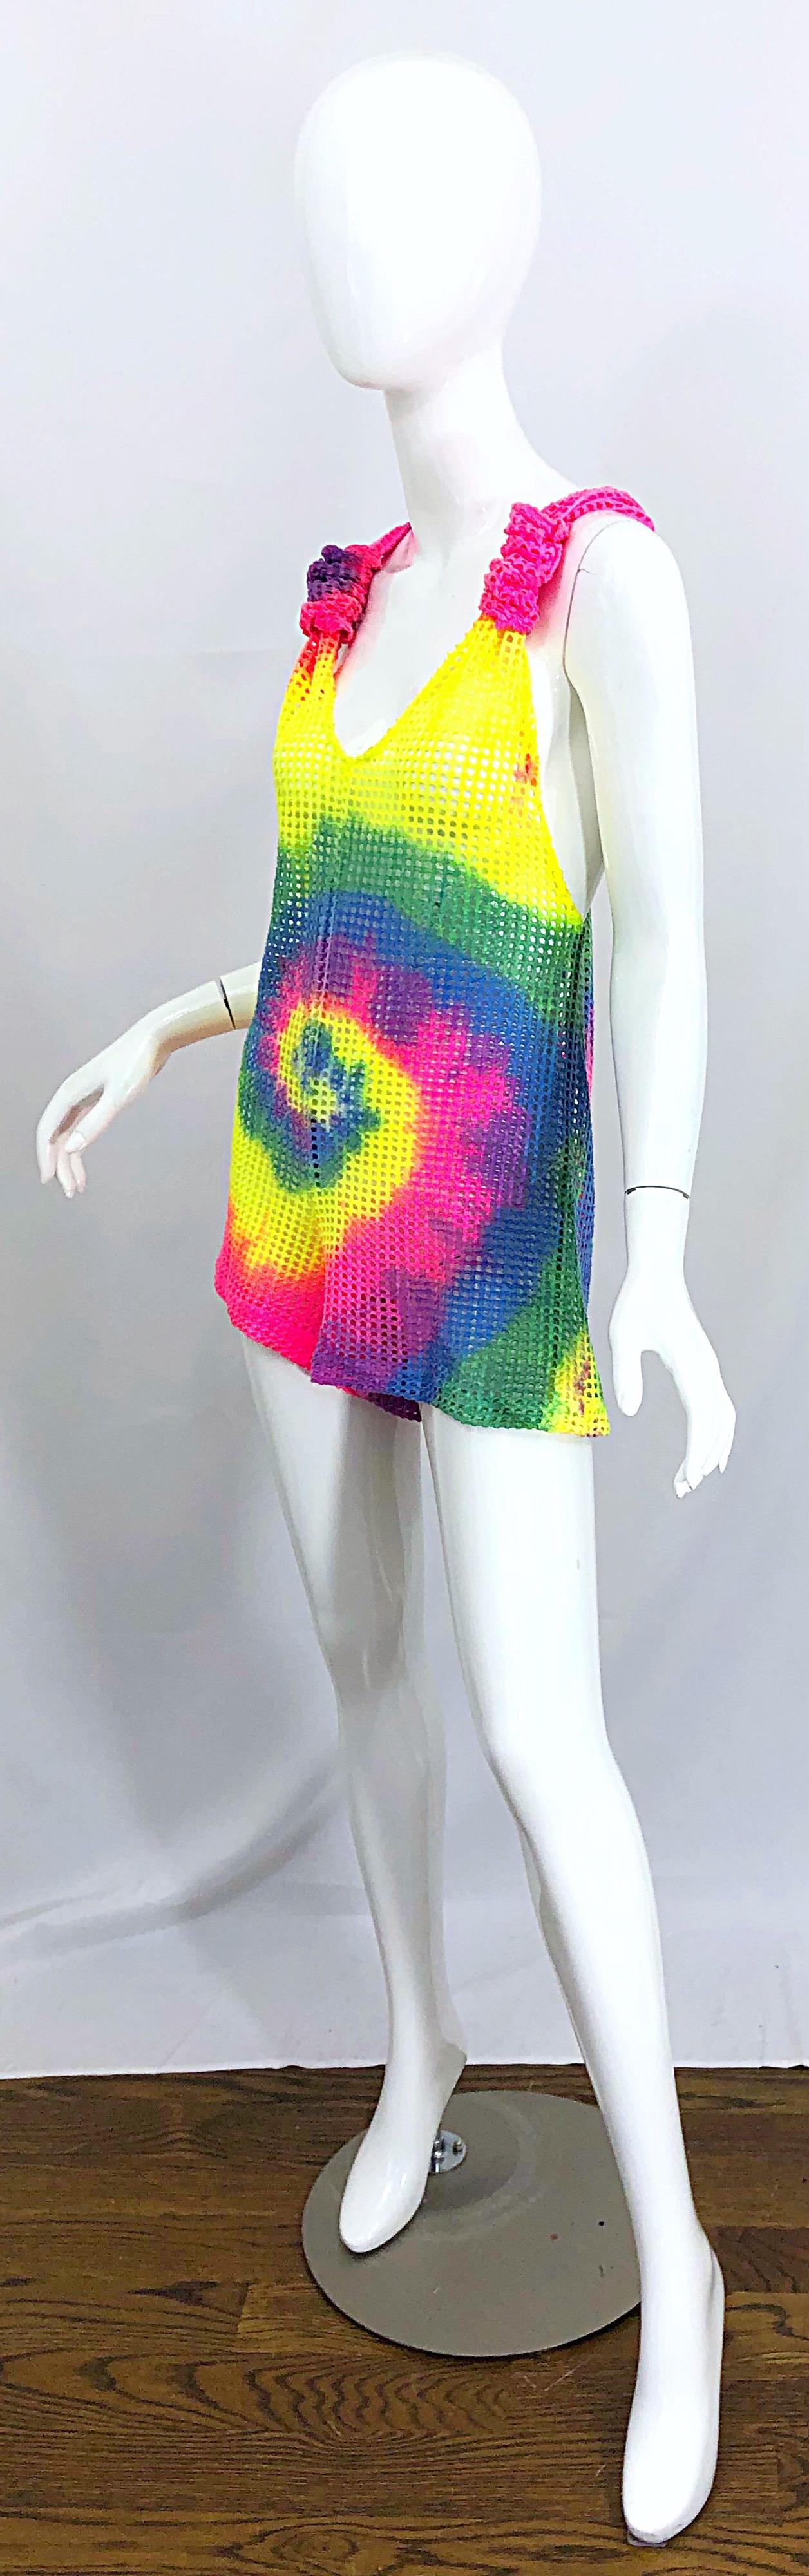 Amazing 1980s Tie Dyed Bright Colorful One Piece Fishnet Cut Out Vintage Romper For Sale 1